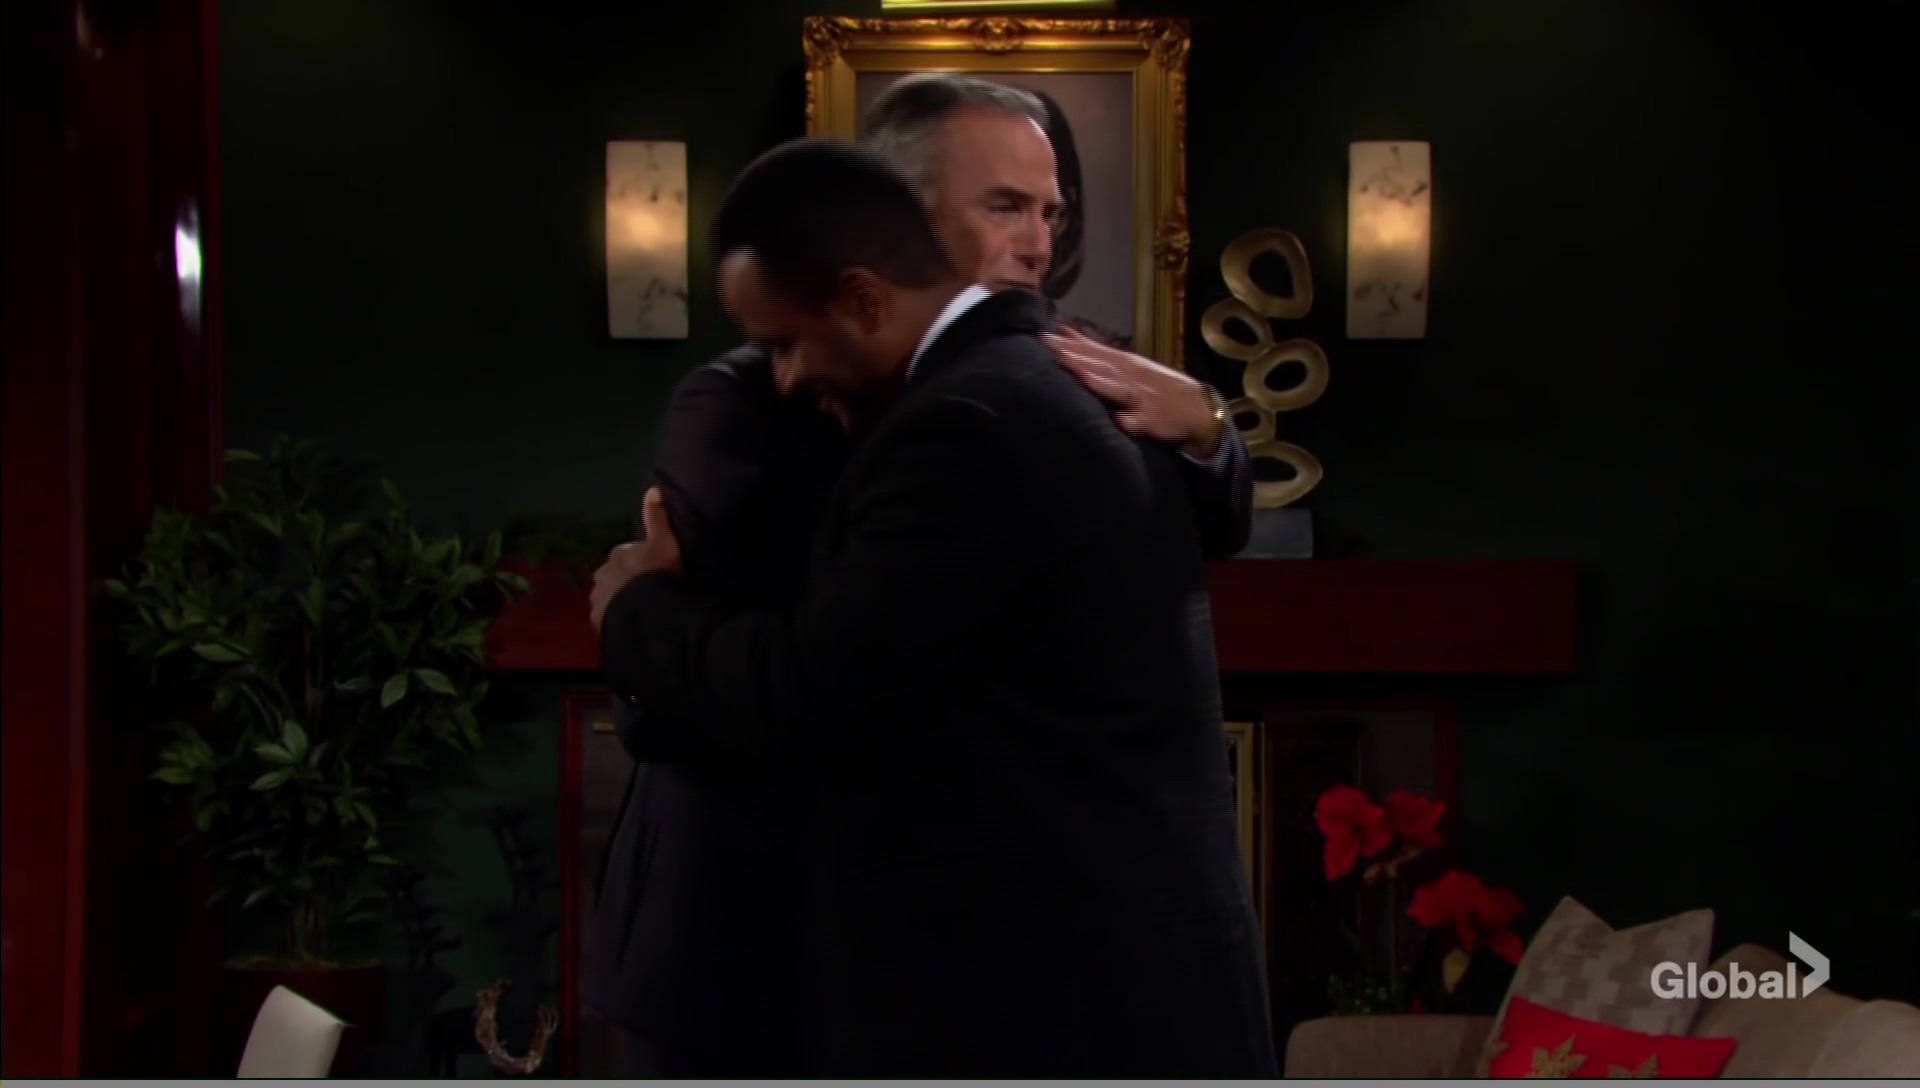 nate hugs ash cancer not spreading young restless